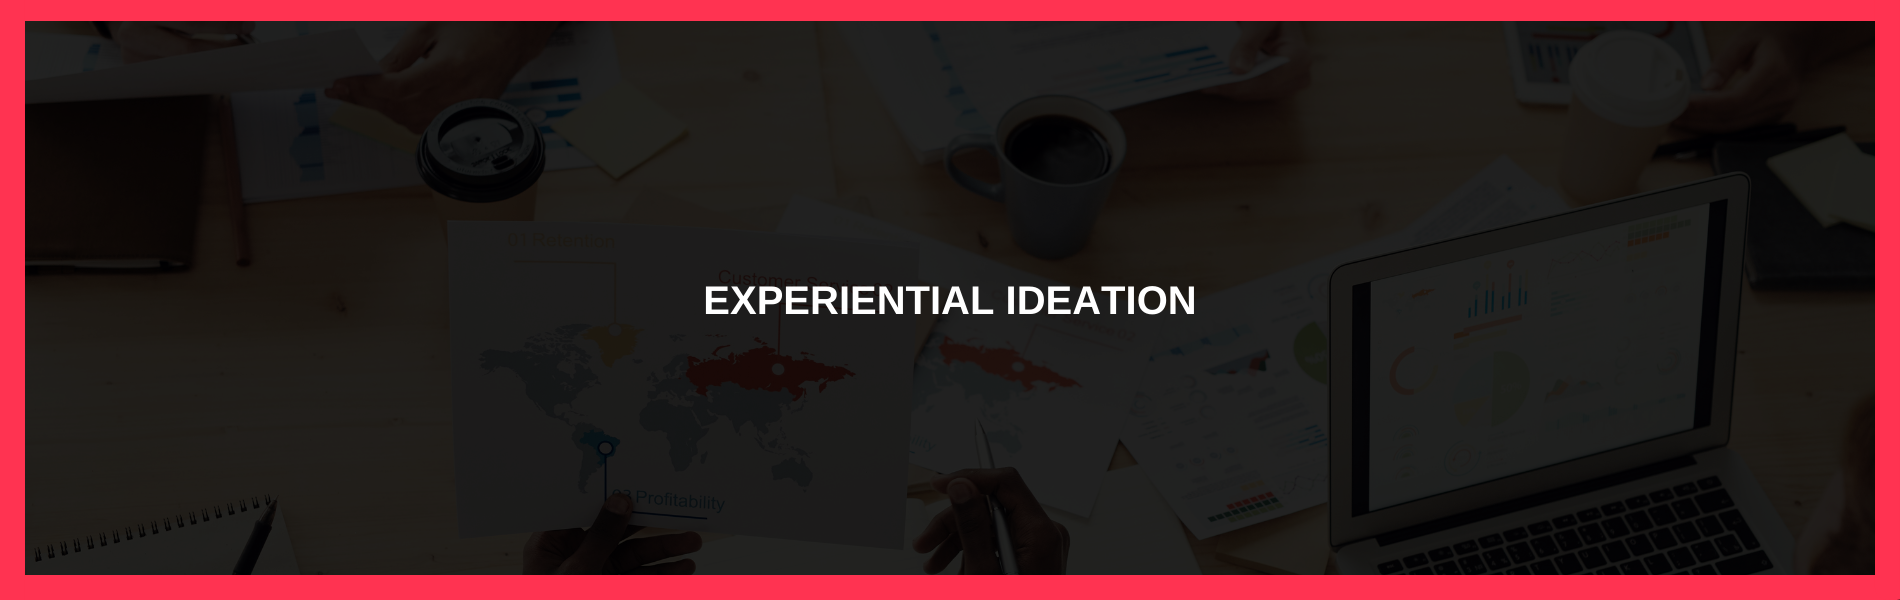 What is Experiential Ideation in Marketing?